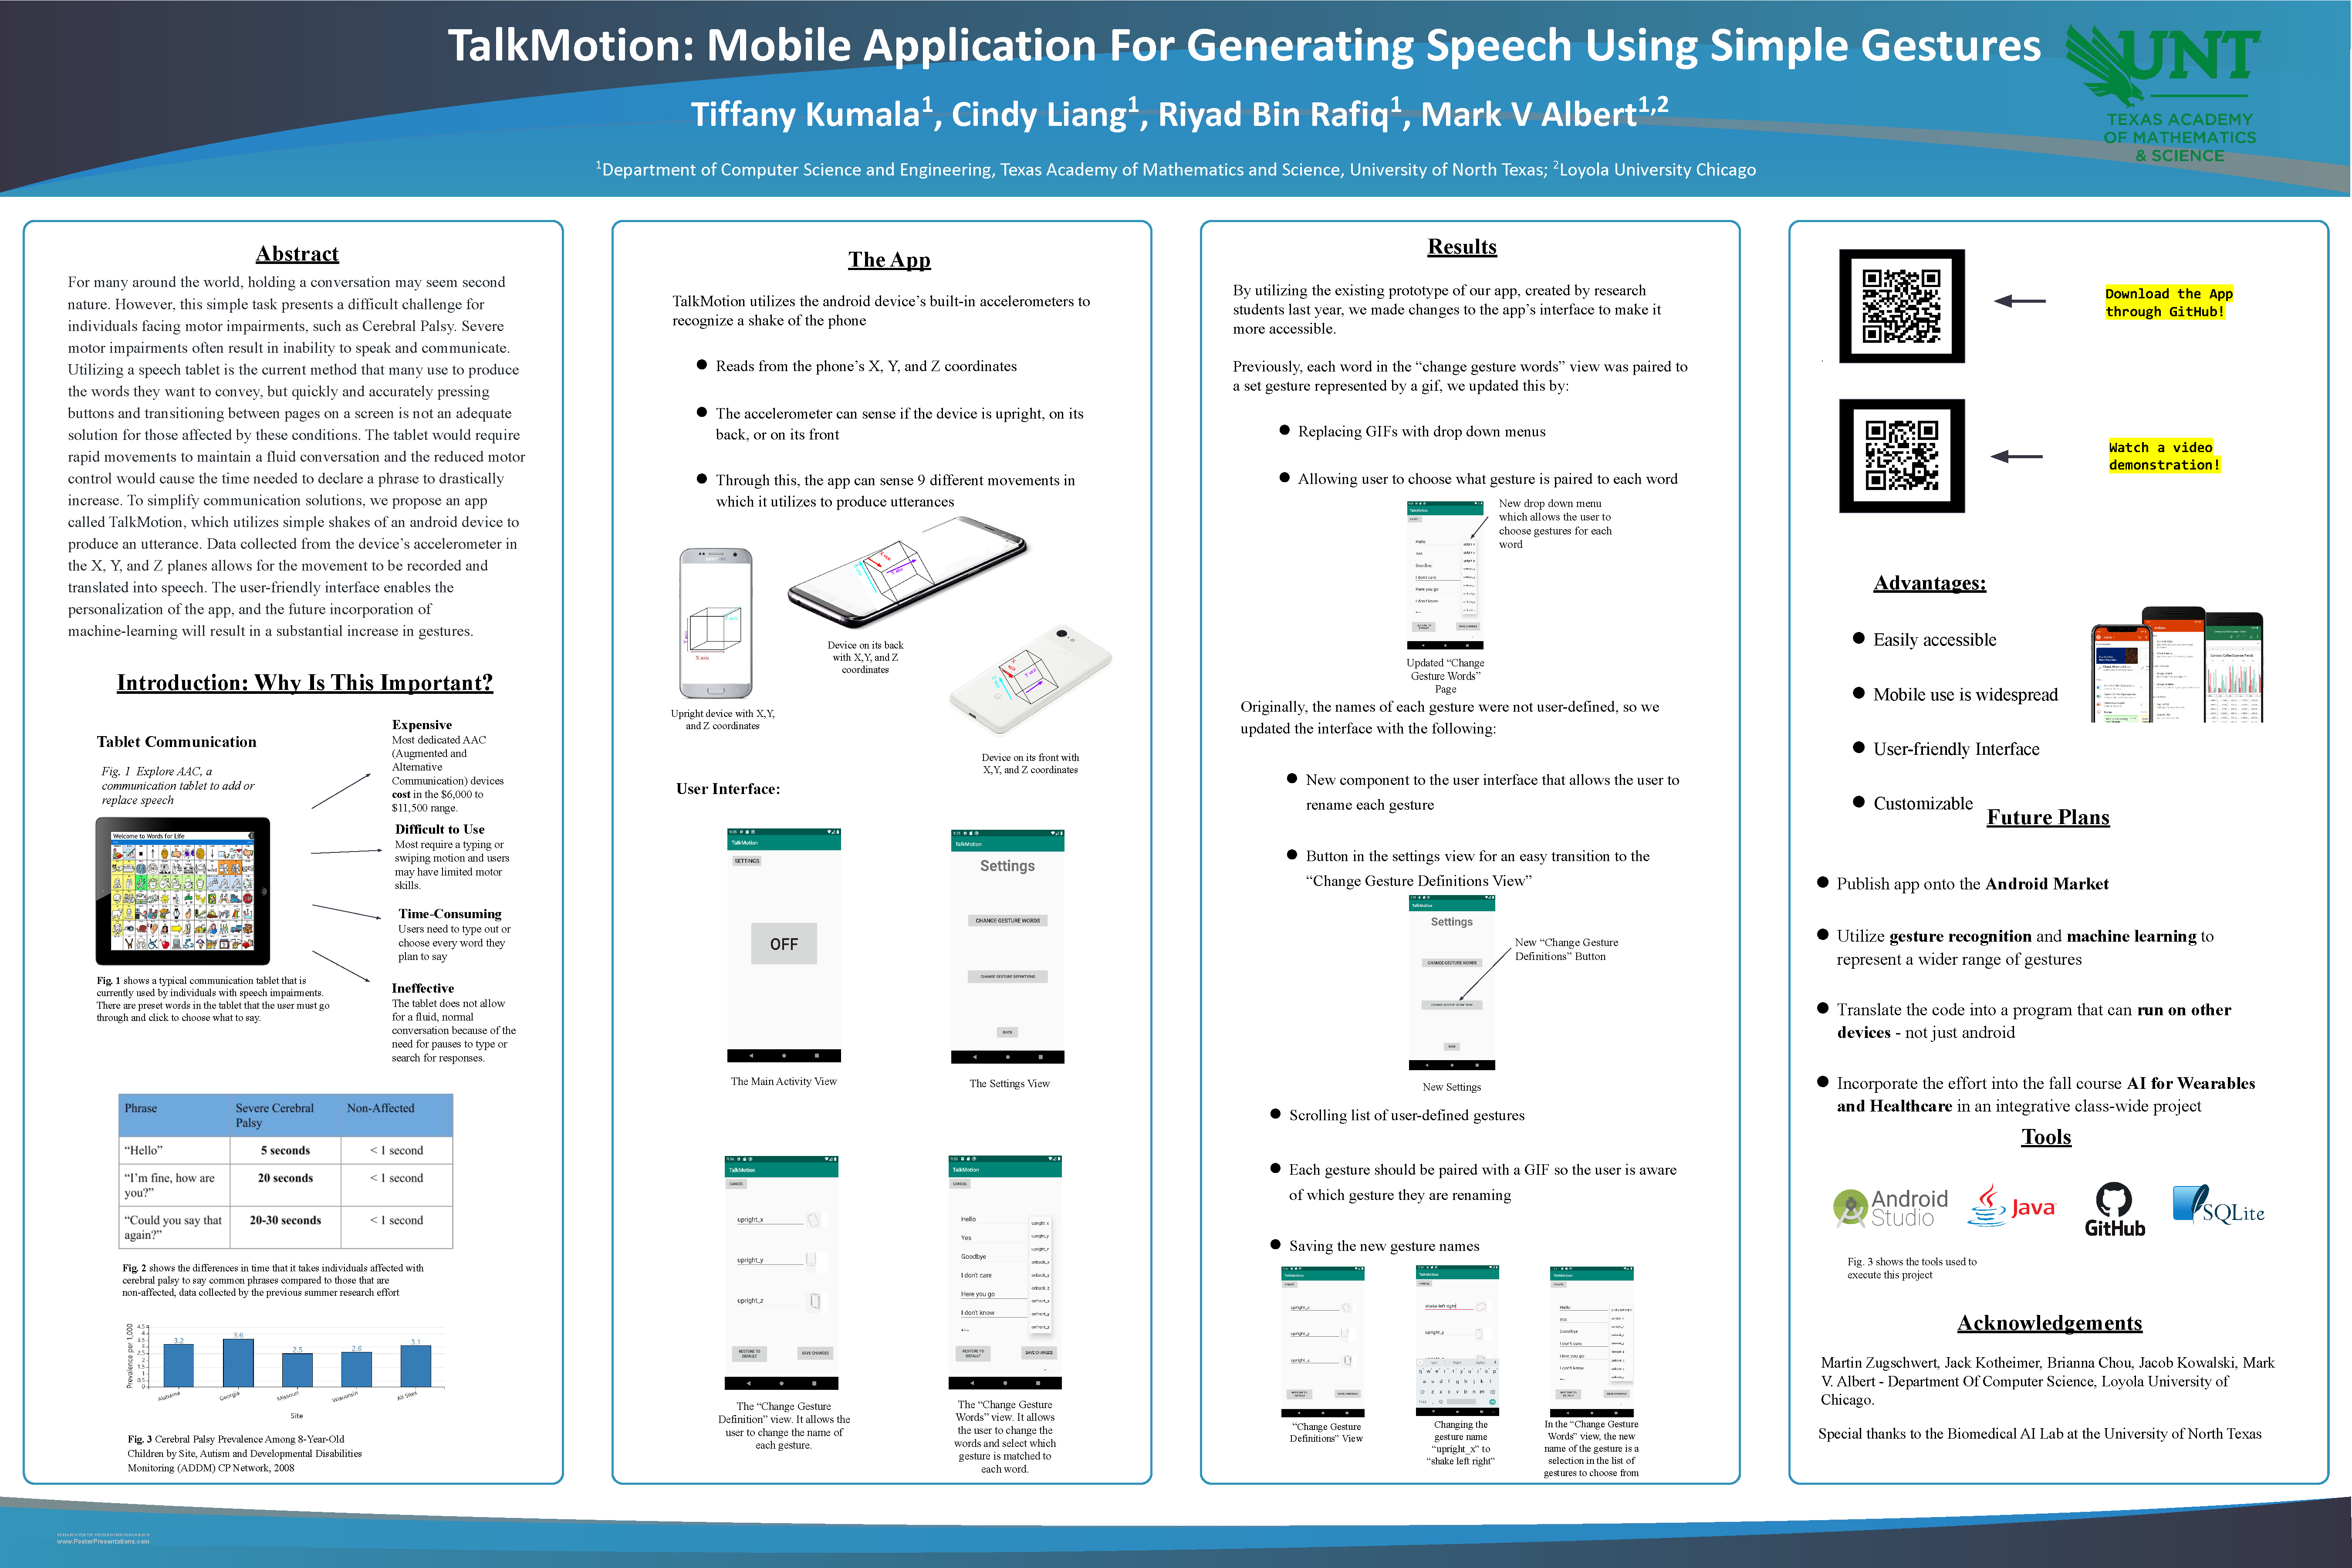 TalkMotion: Mobile Application For Generating Speech Using Simple Gestures